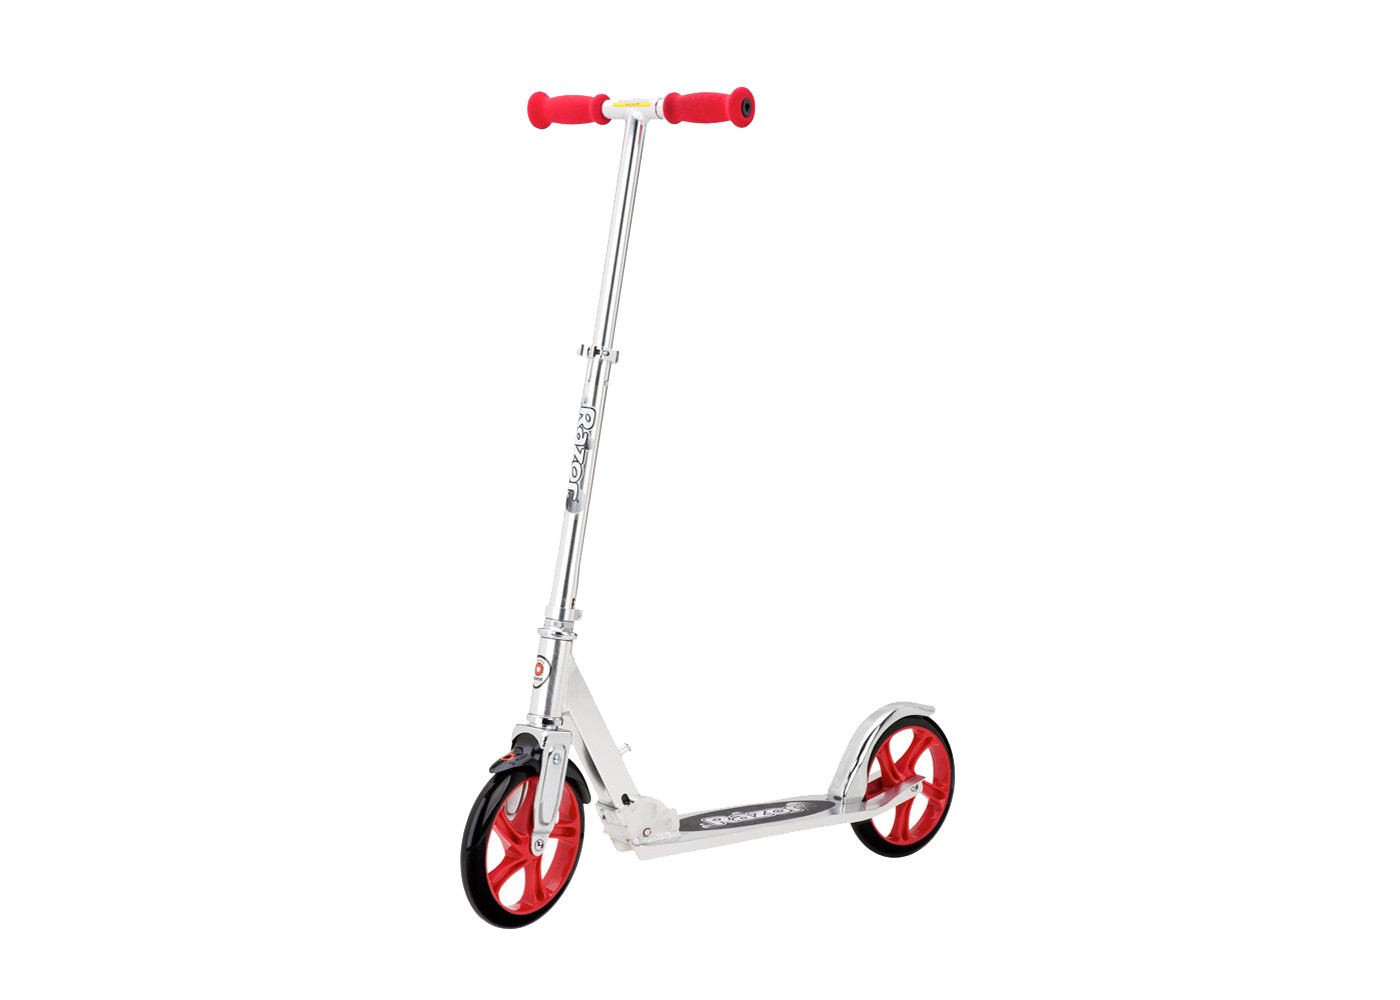 Cool gifts for tween boys (and girls): Razor A5 Lux Scooter